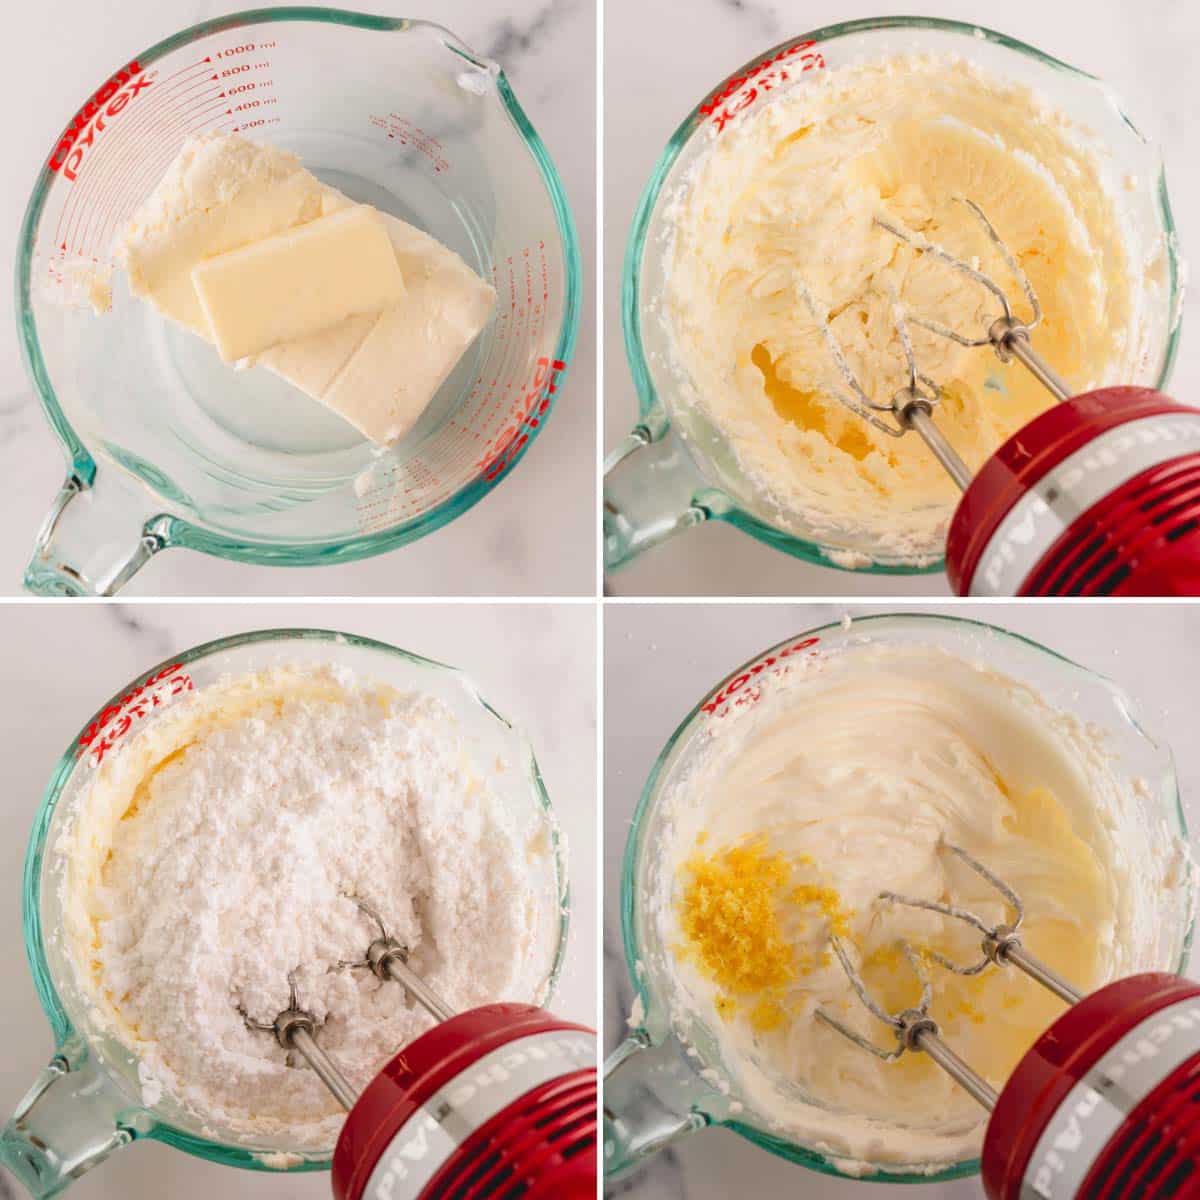 Four images showing the process of beating ingredients to make lemon cream cheese frosting.